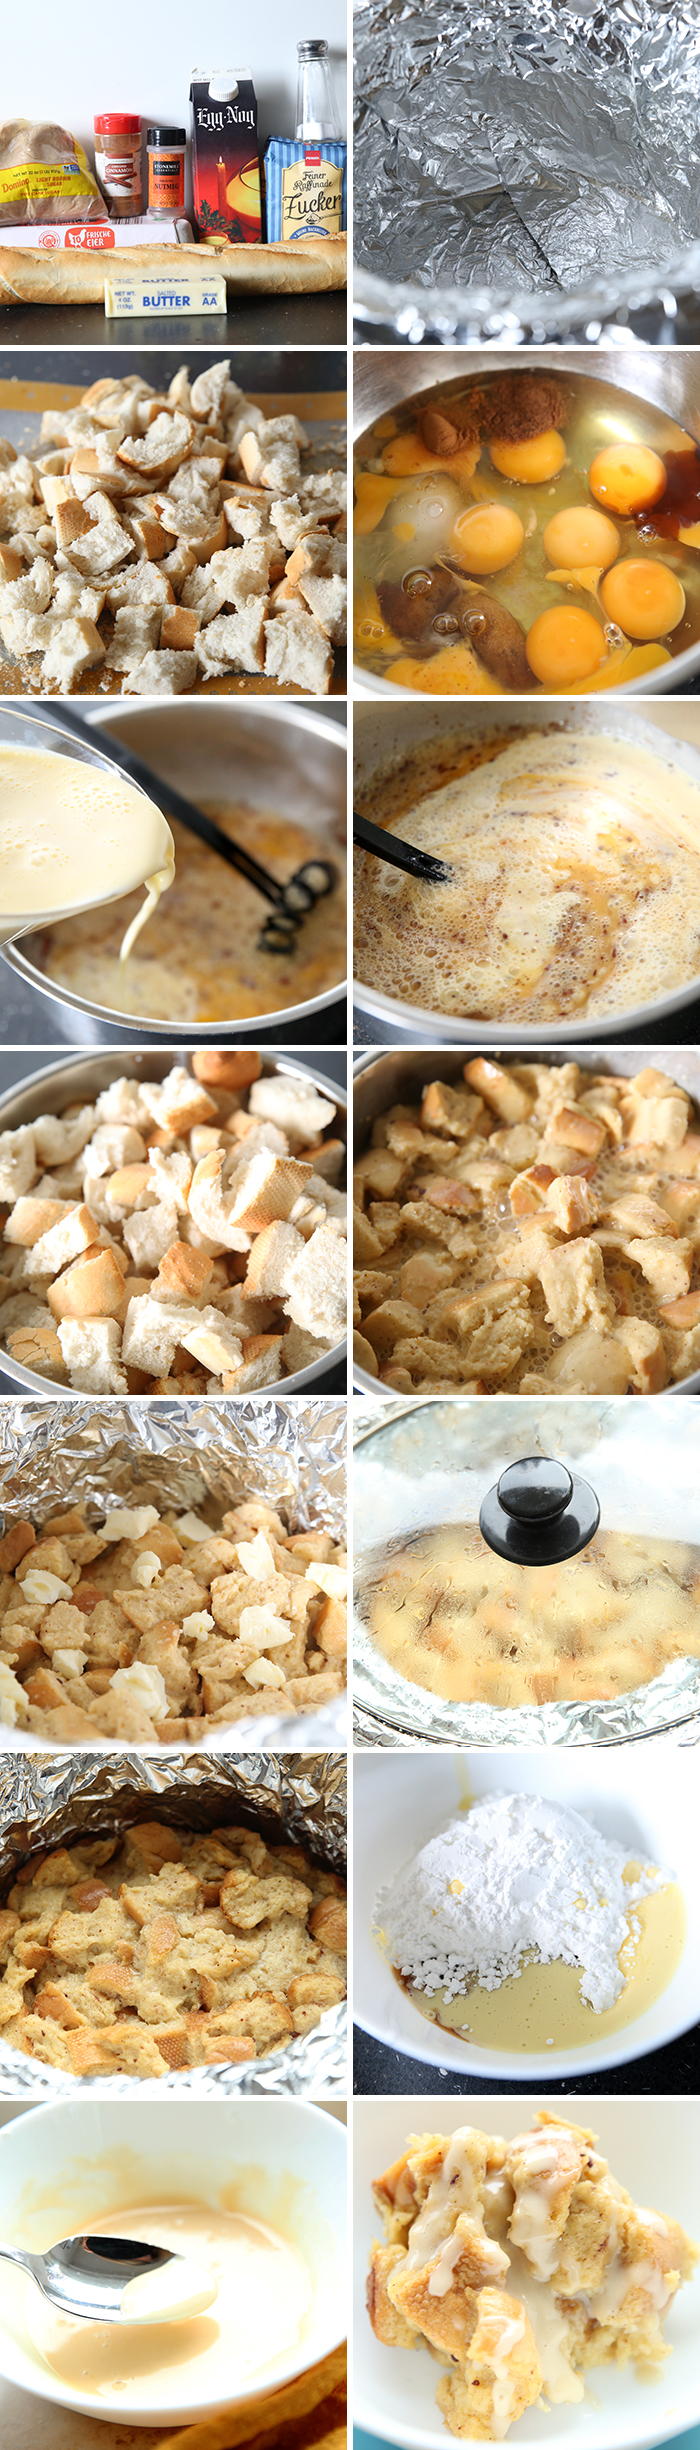 step by step collage of slwo cooker frech toast egg nog casserole